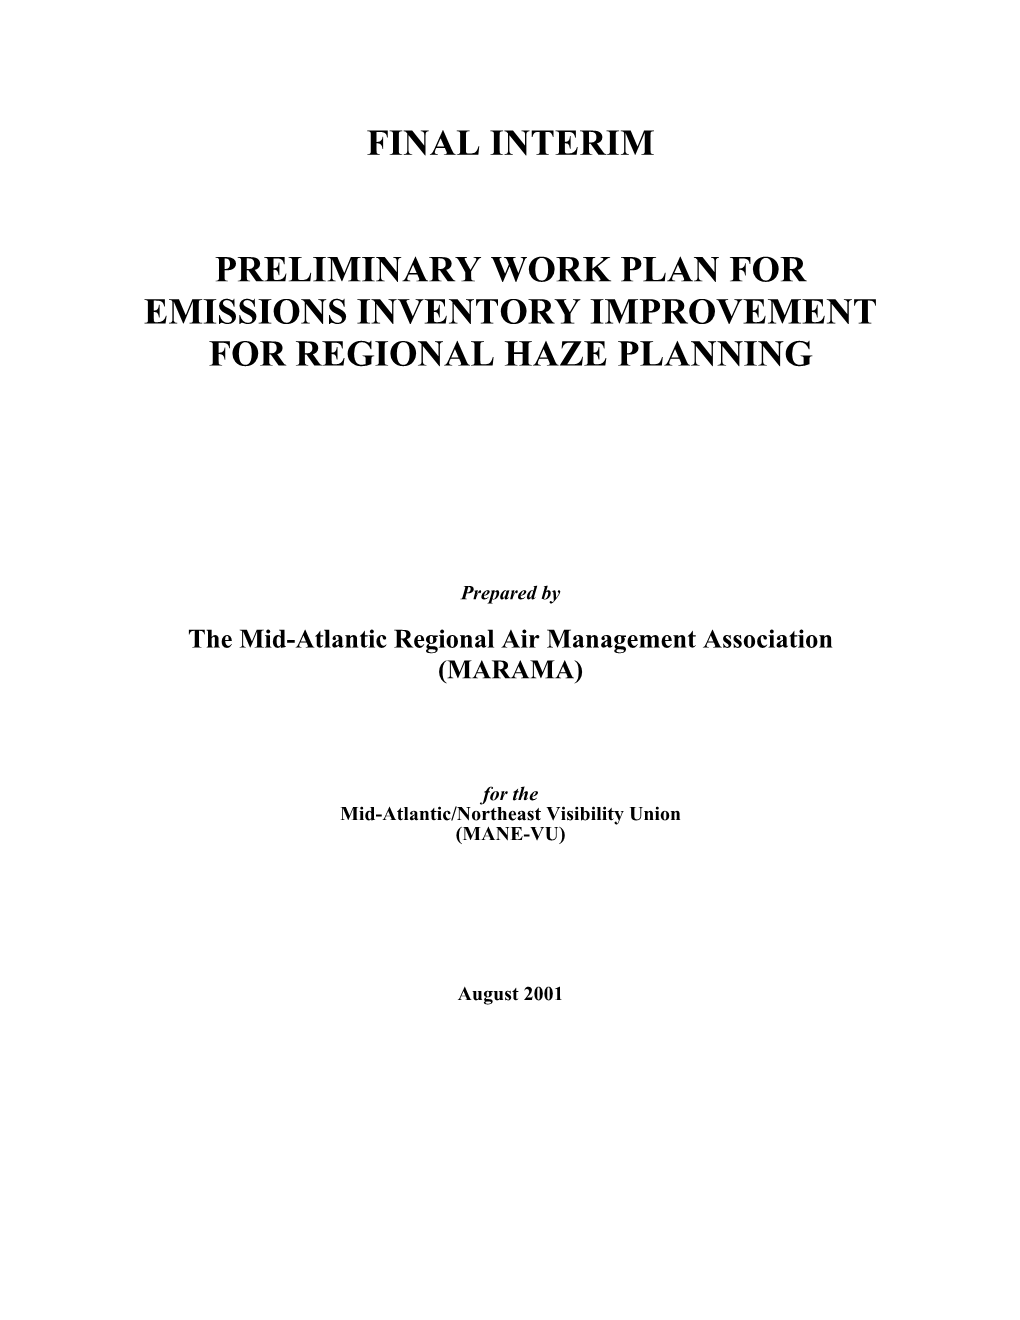 Preliminary Work Plan for Emissions Inventory Improvement for Regional Haze Planning